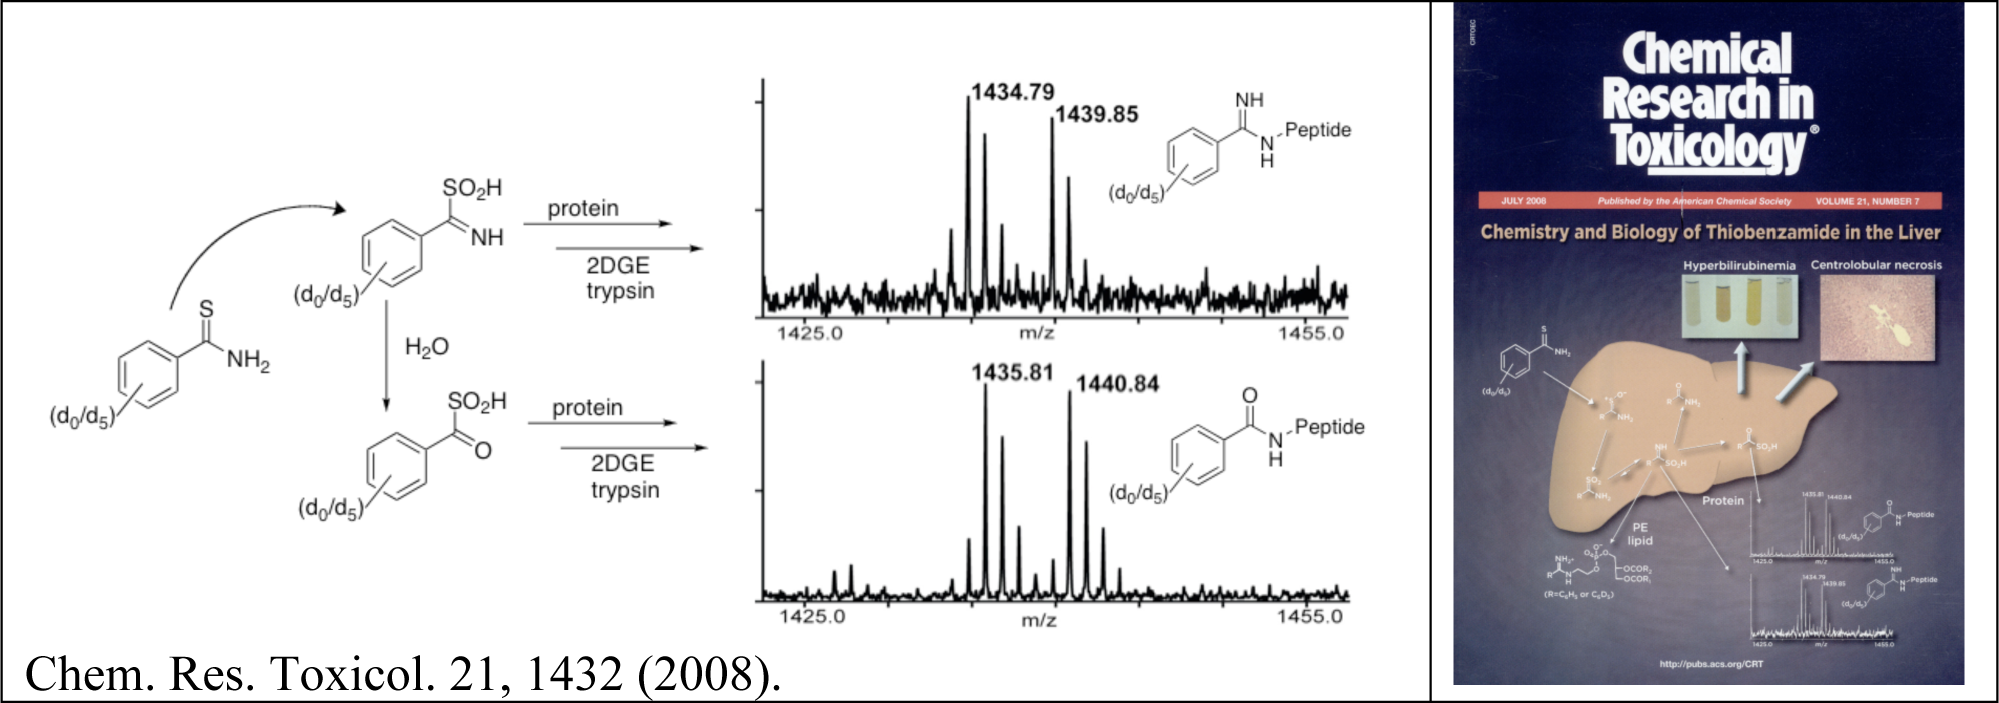 Image 1: Chem. Res. Toxicol. 21, 1432 (2008); Image 2: Cover of Chemical Research in Toxicology journal